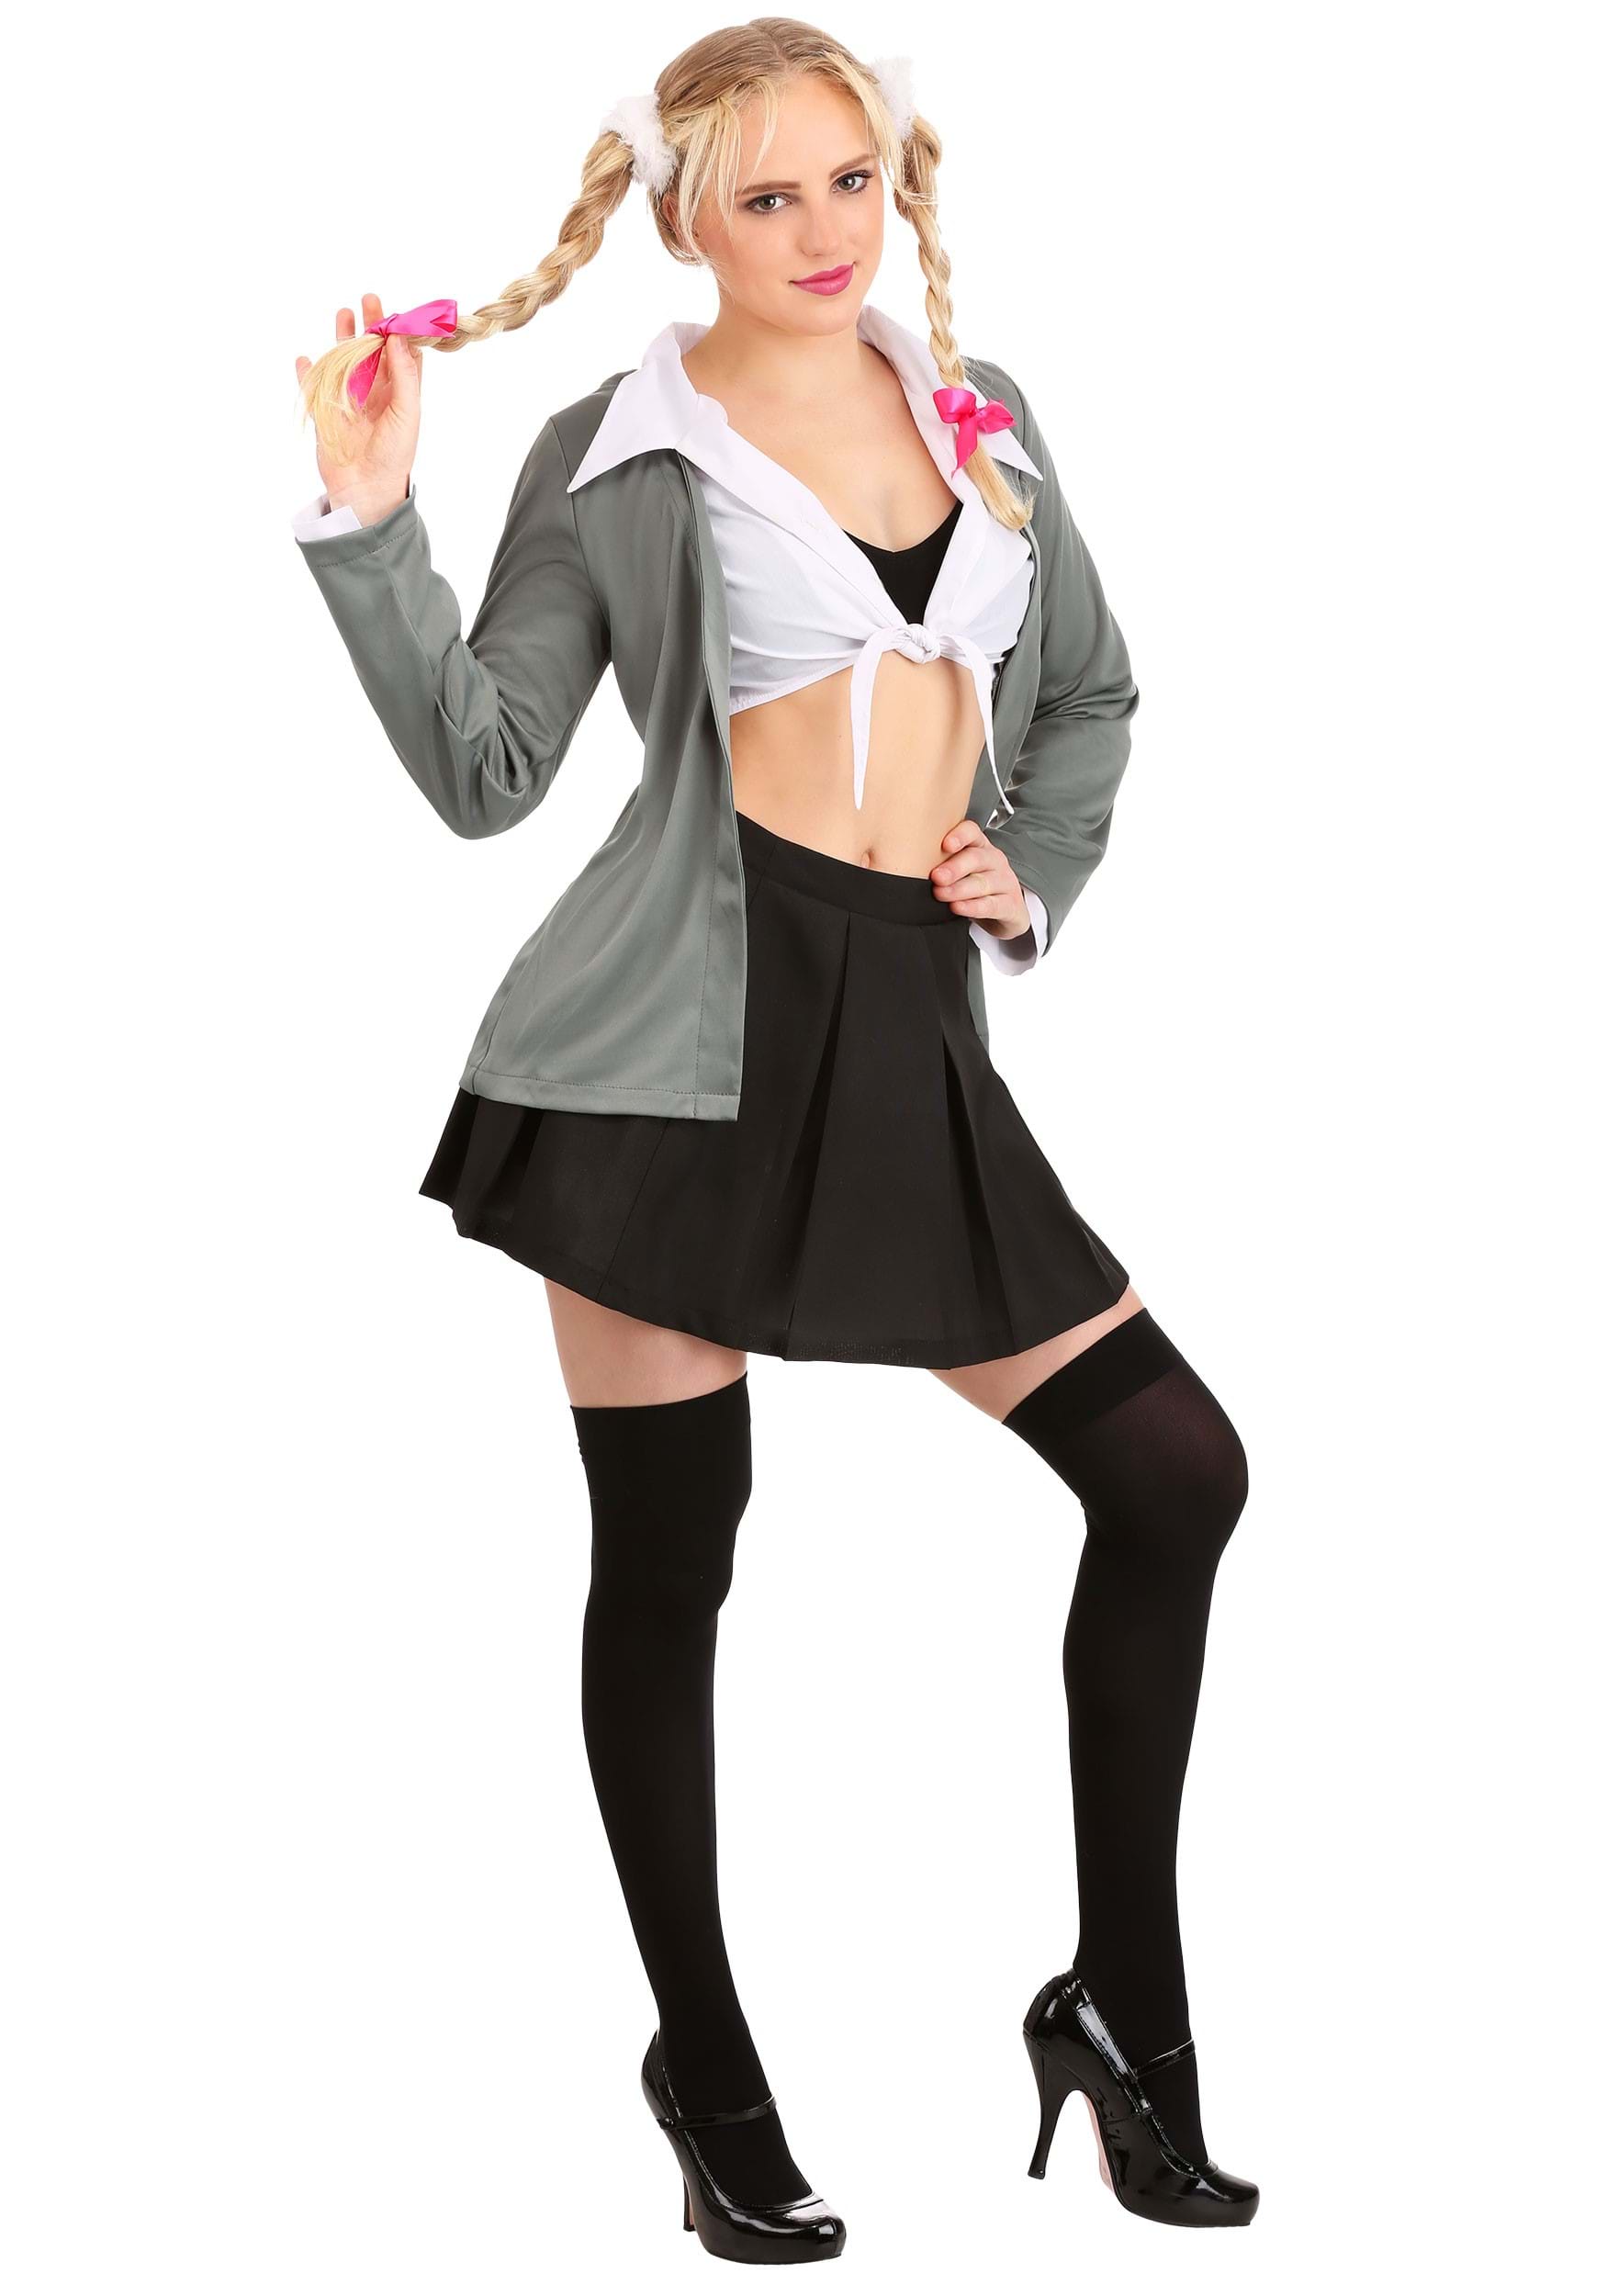 One More Time Pop Singer Costume Women’s